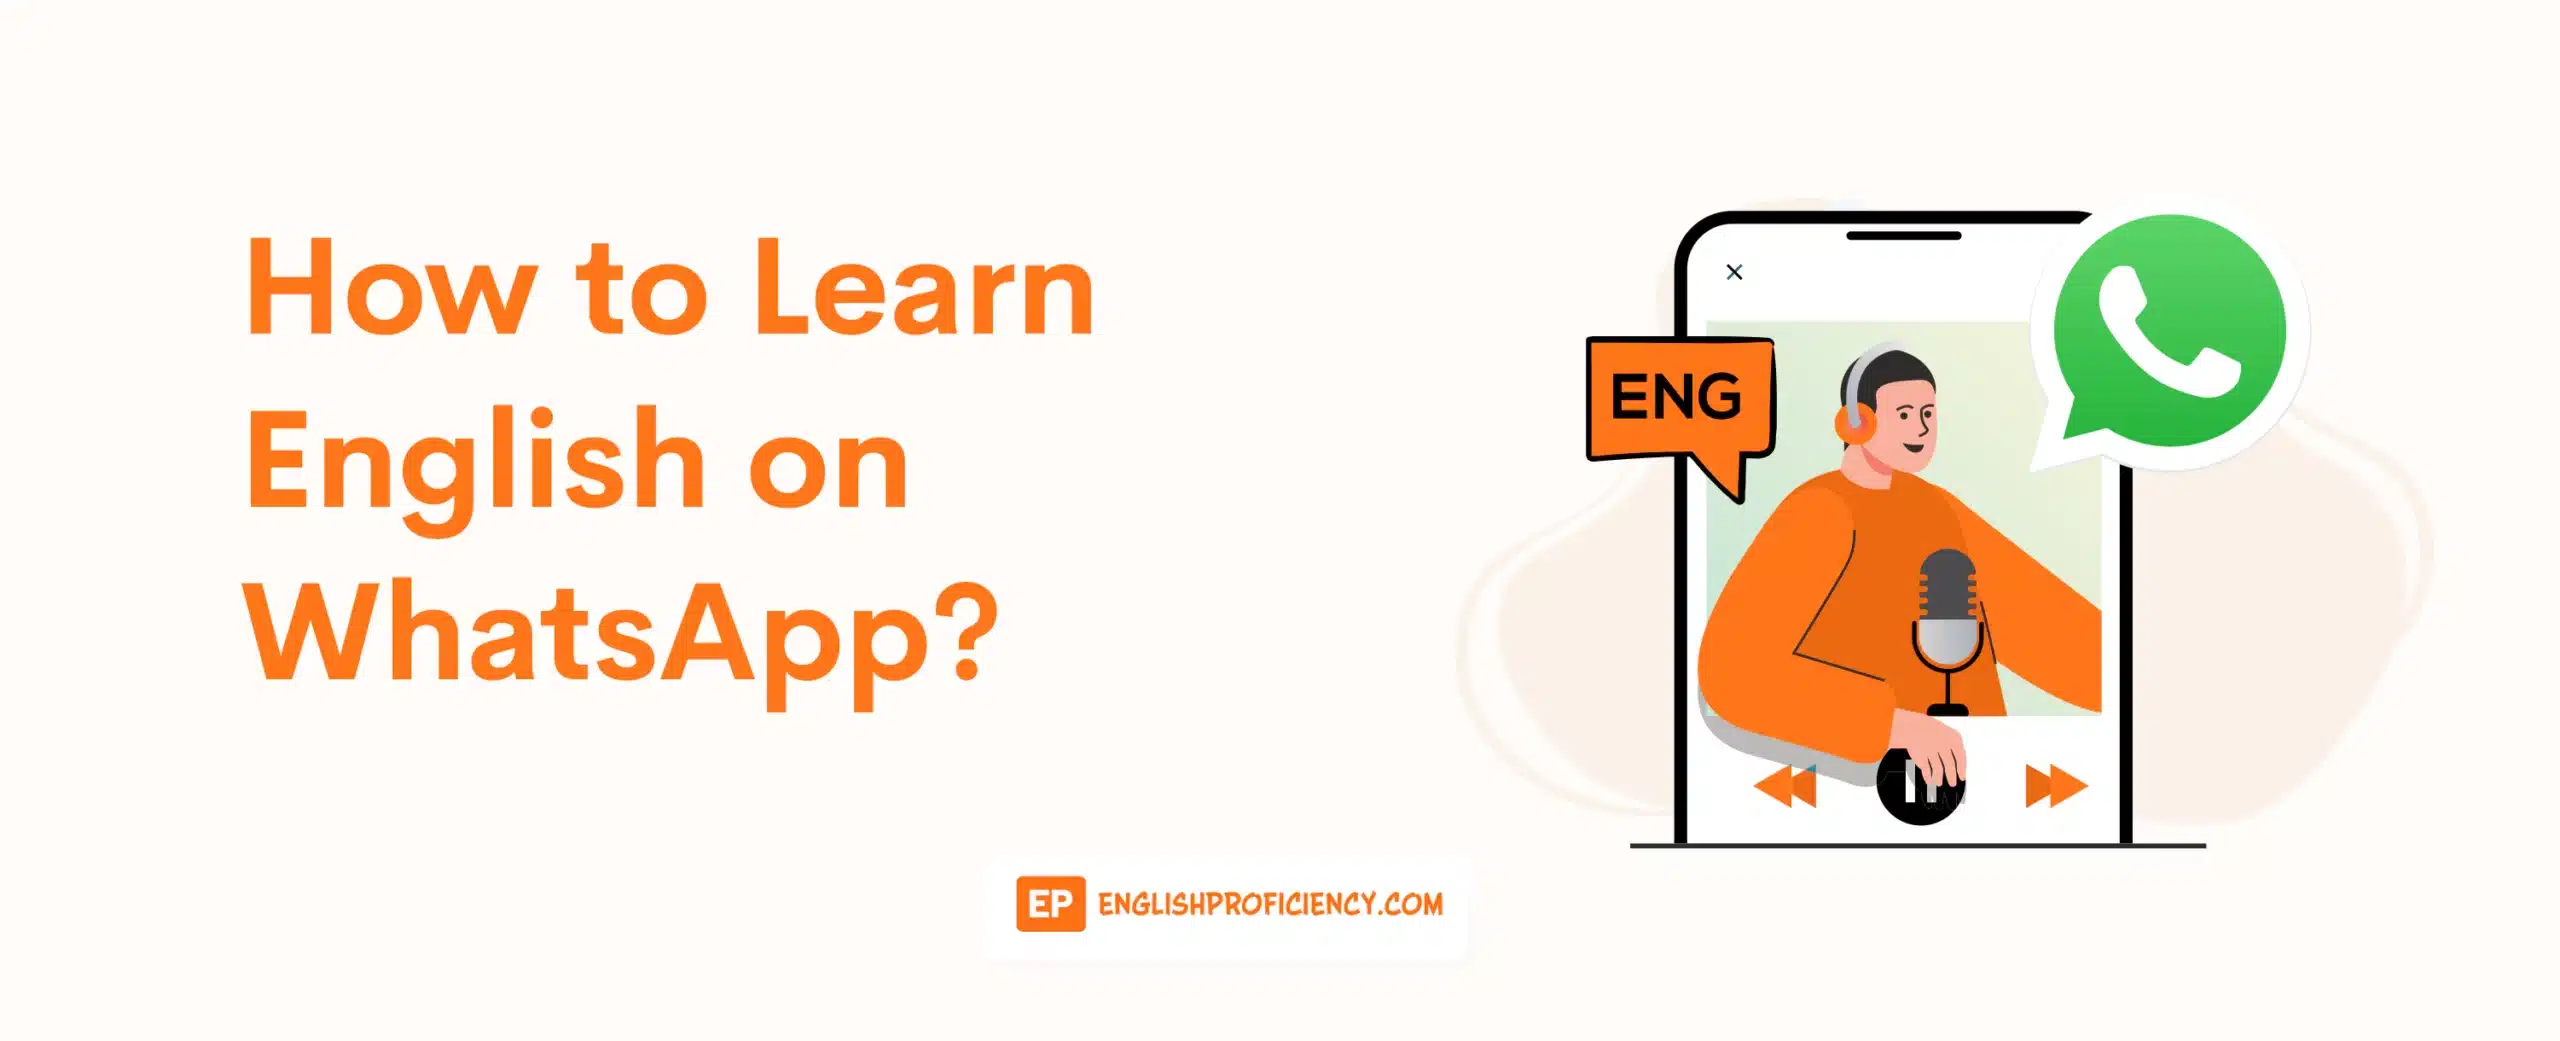 How to Learn English on WhatsApp